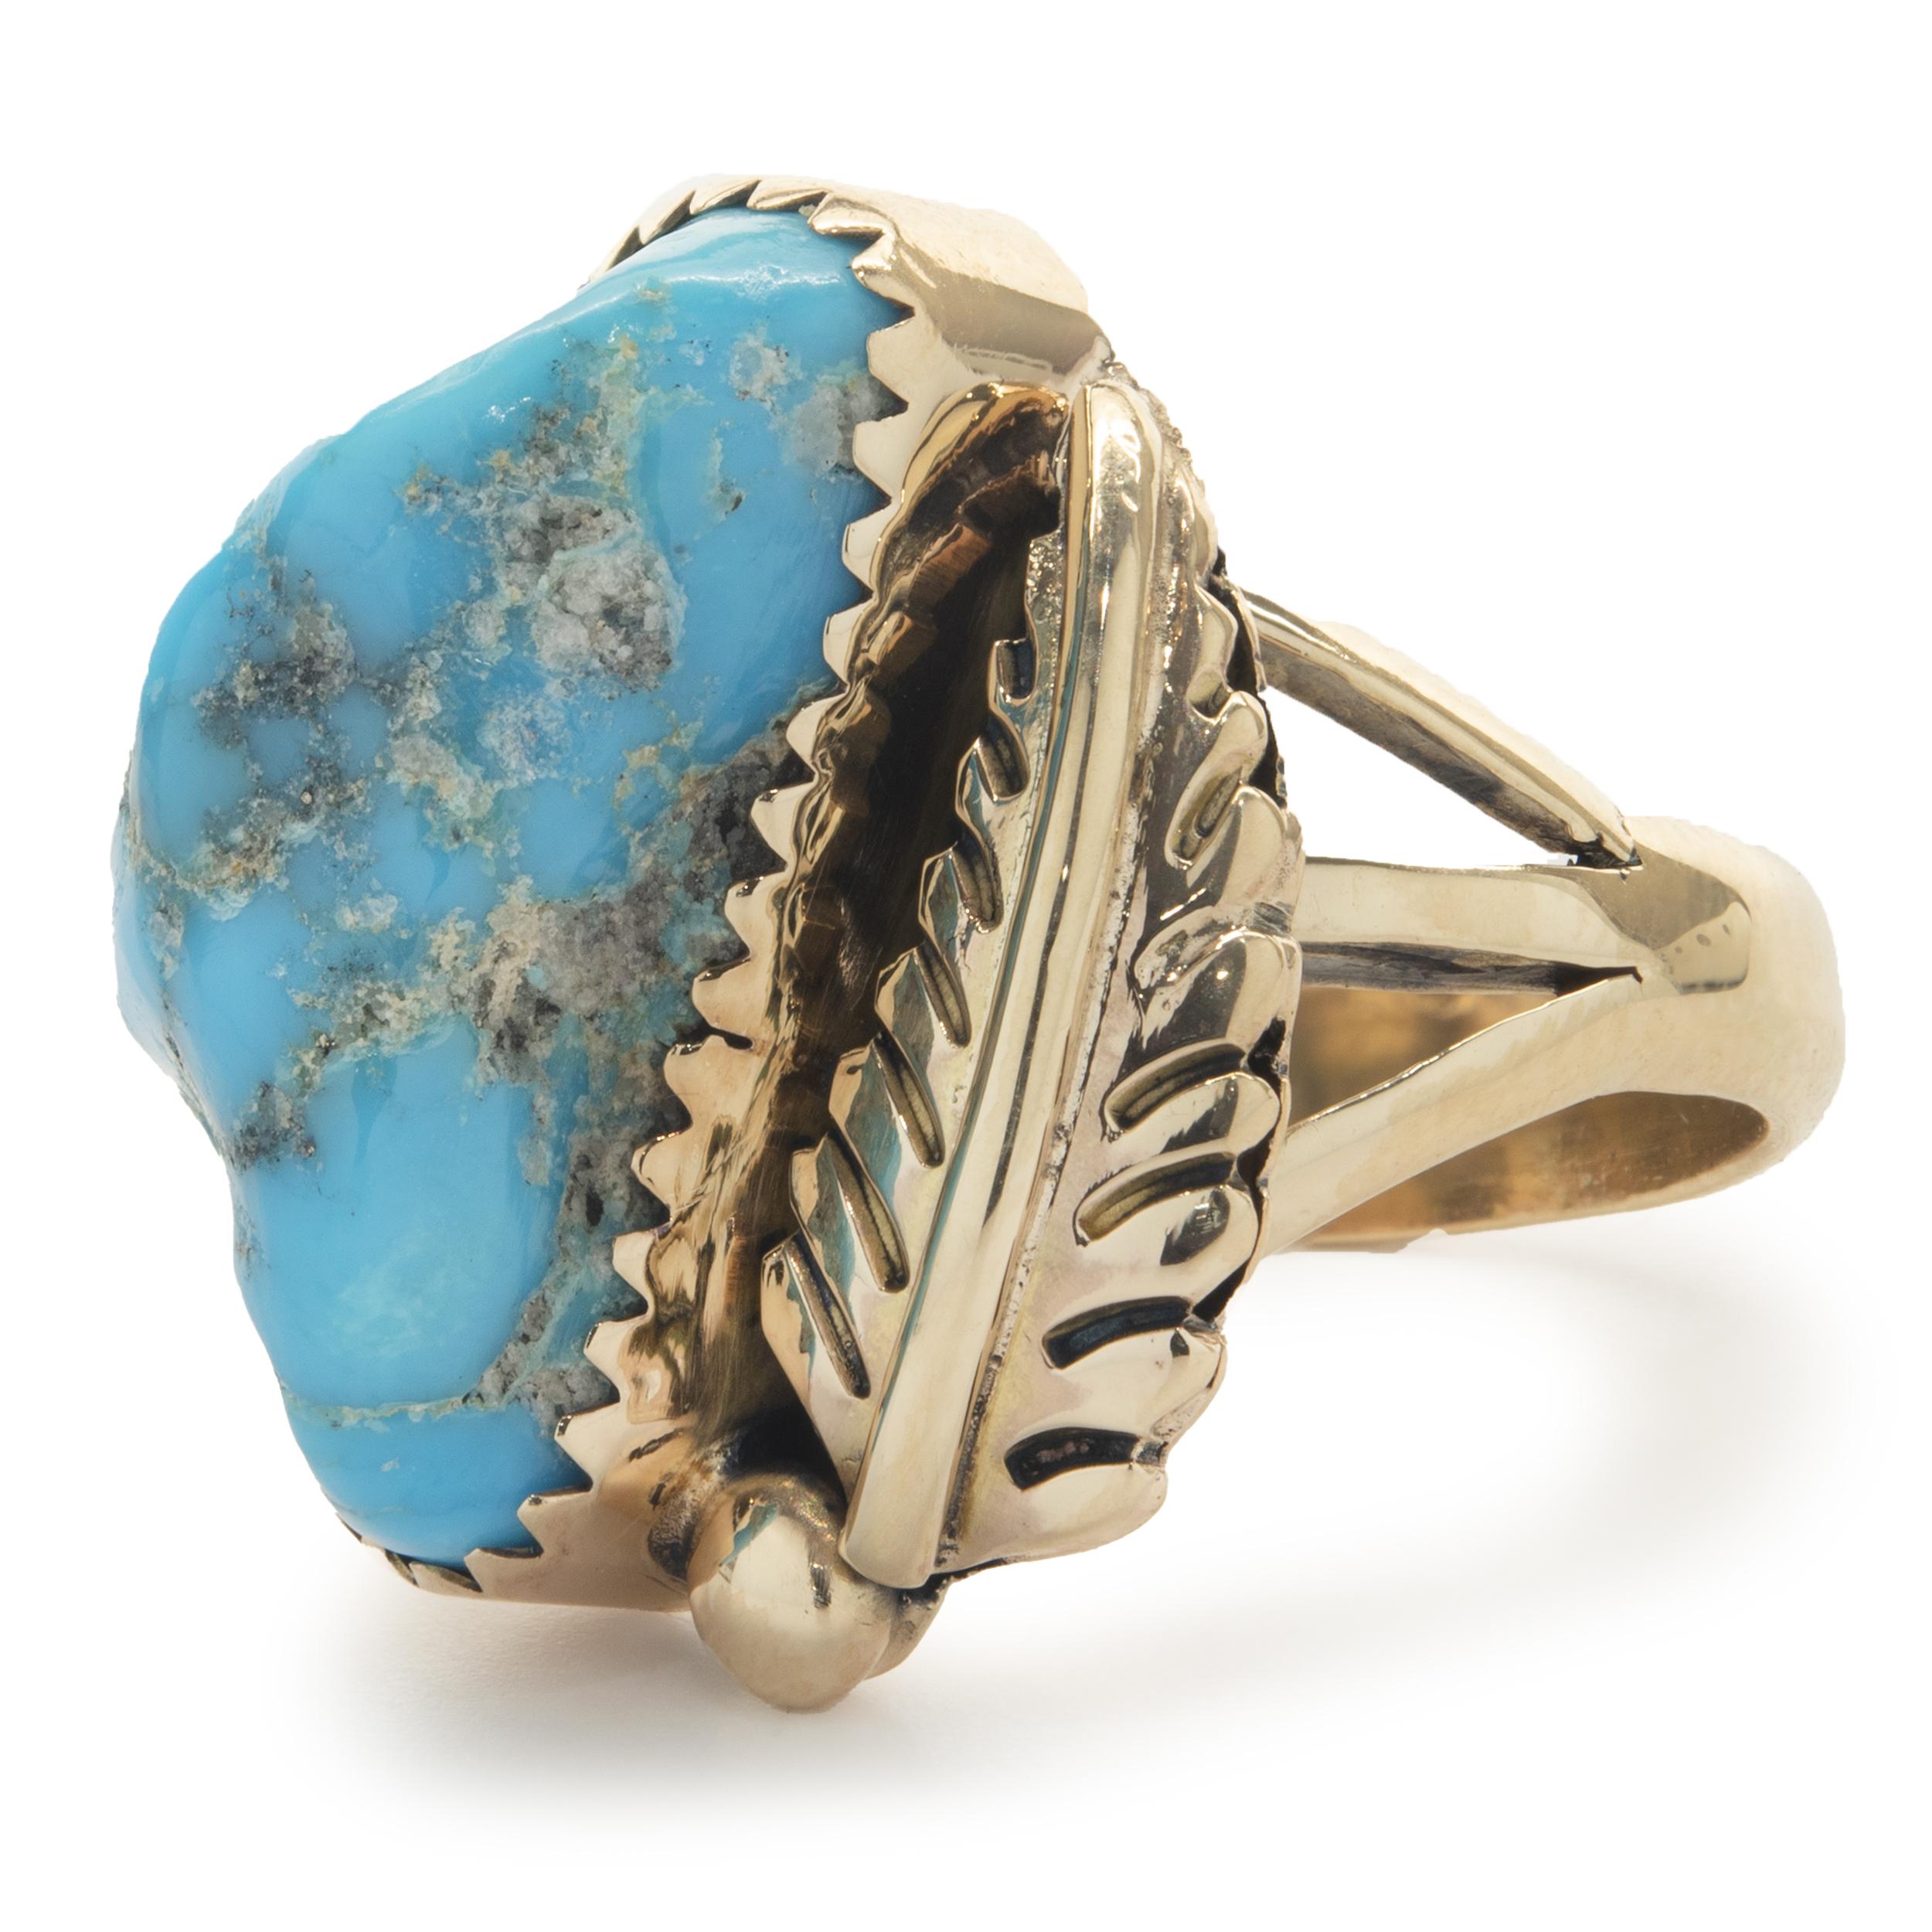 Designer: Native American
Material: 14K yellow gold
Dimensions: ring top measures 21mm wide
Size: 3.5
Weight: 7.61 grams
